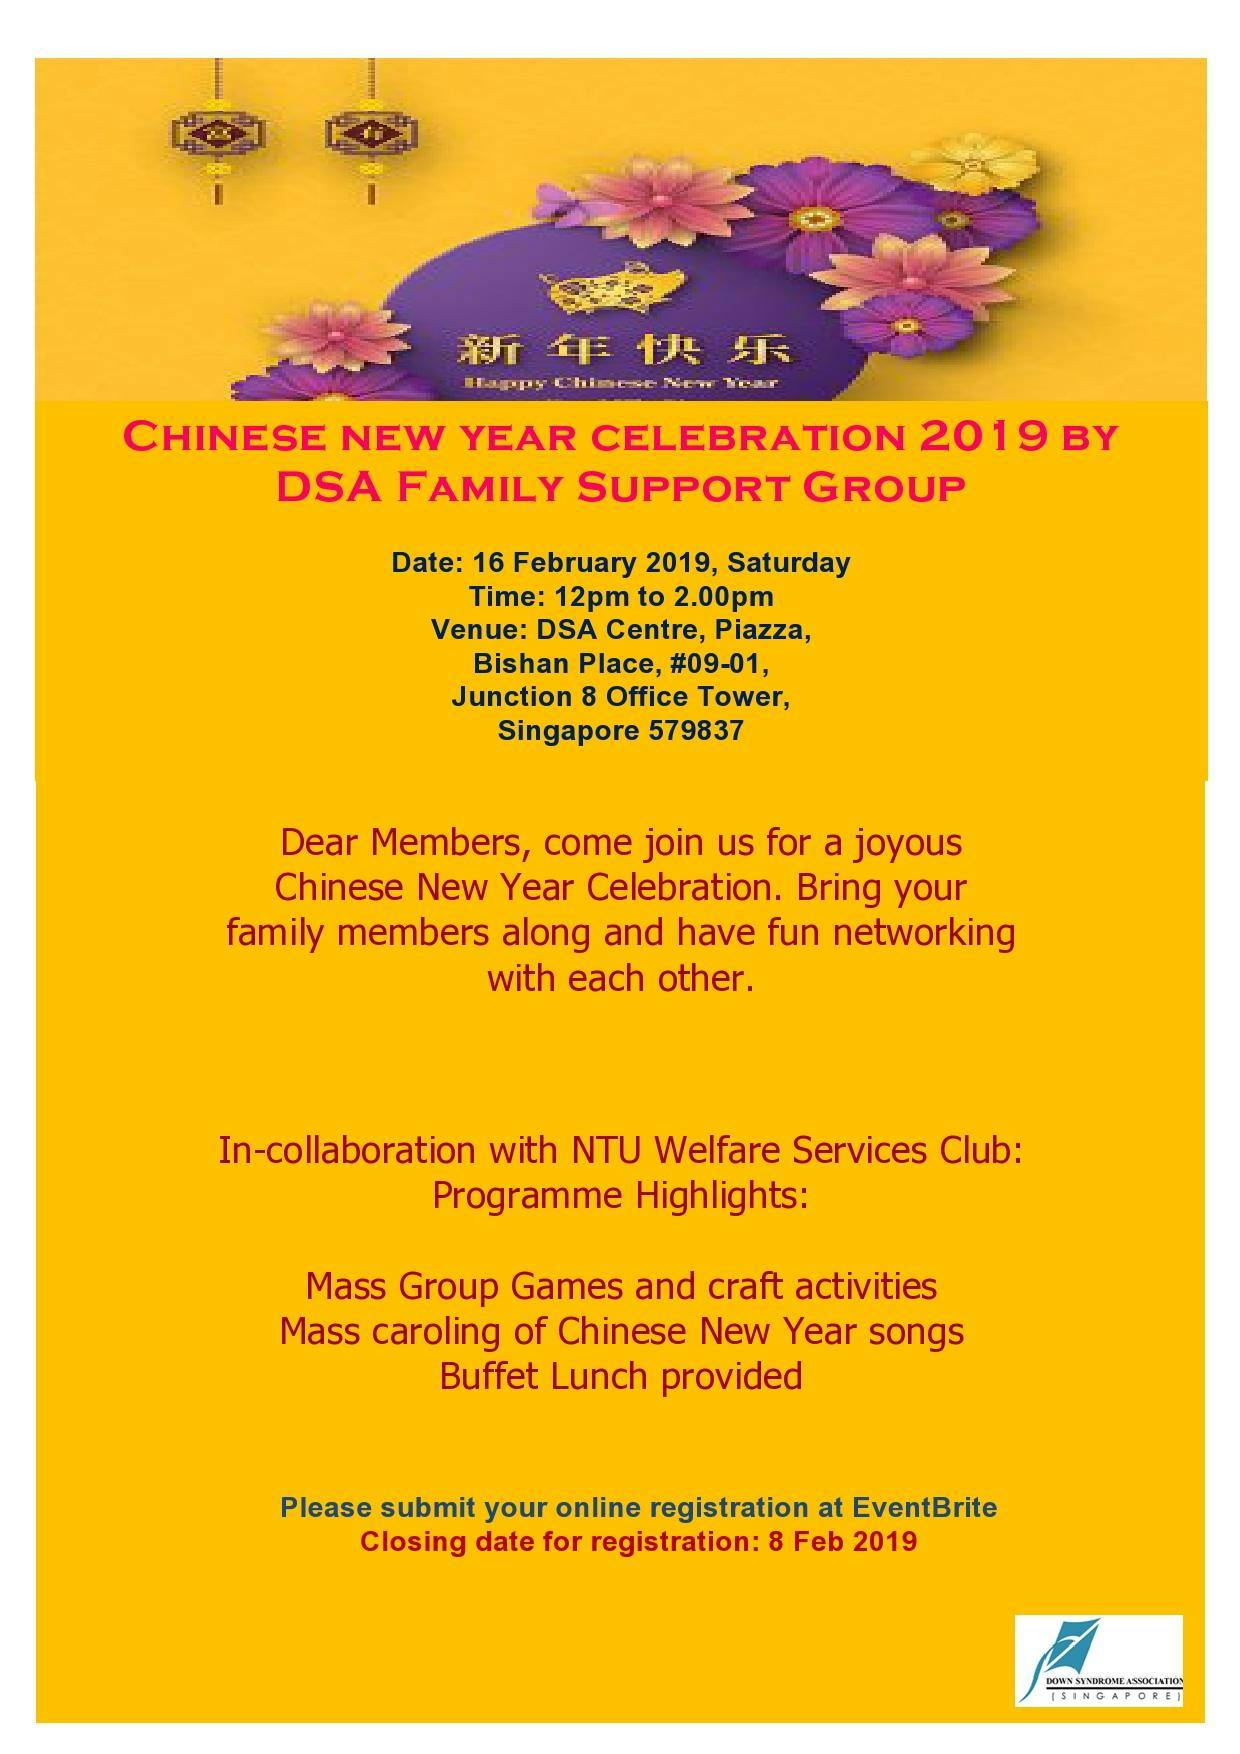 Chinese new year celebration 2019 by DSA Family Support Group 